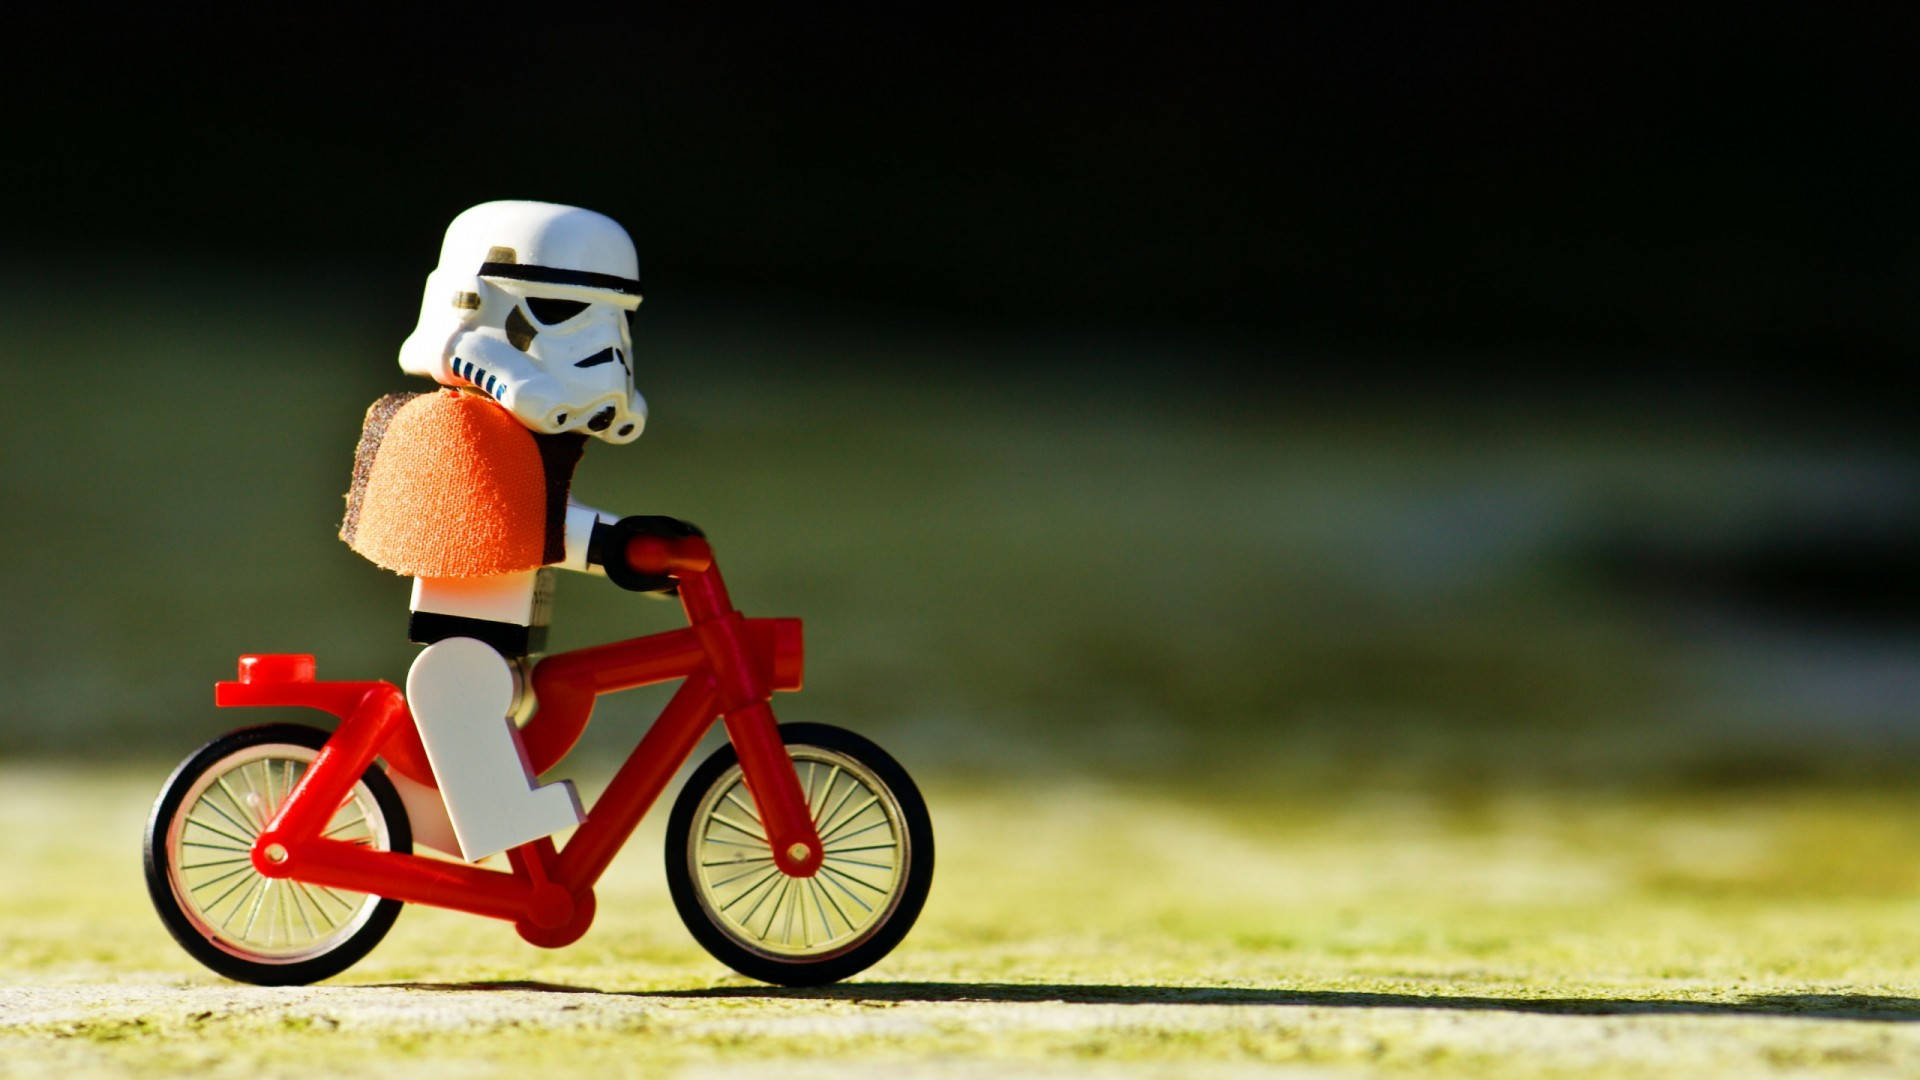 Blast Into The Galaxy with Lego Star Wars Wallpaper